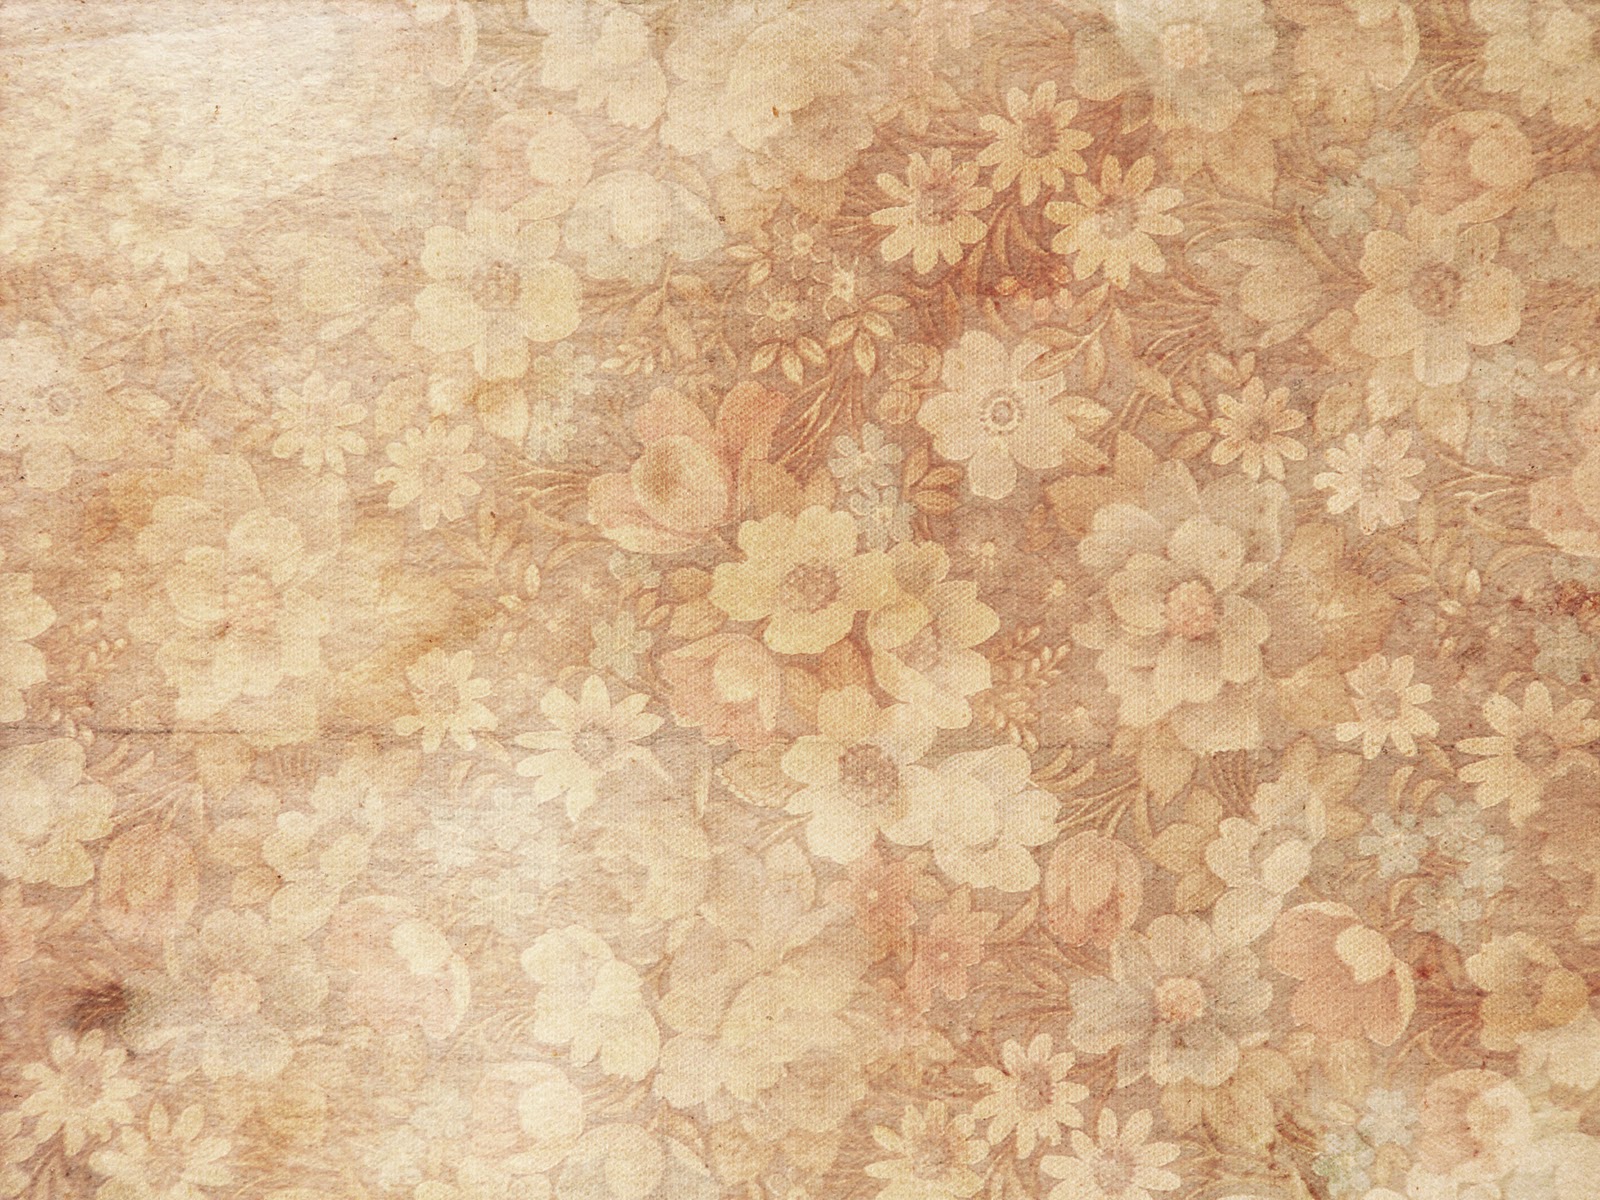 Floral background texture download free HD